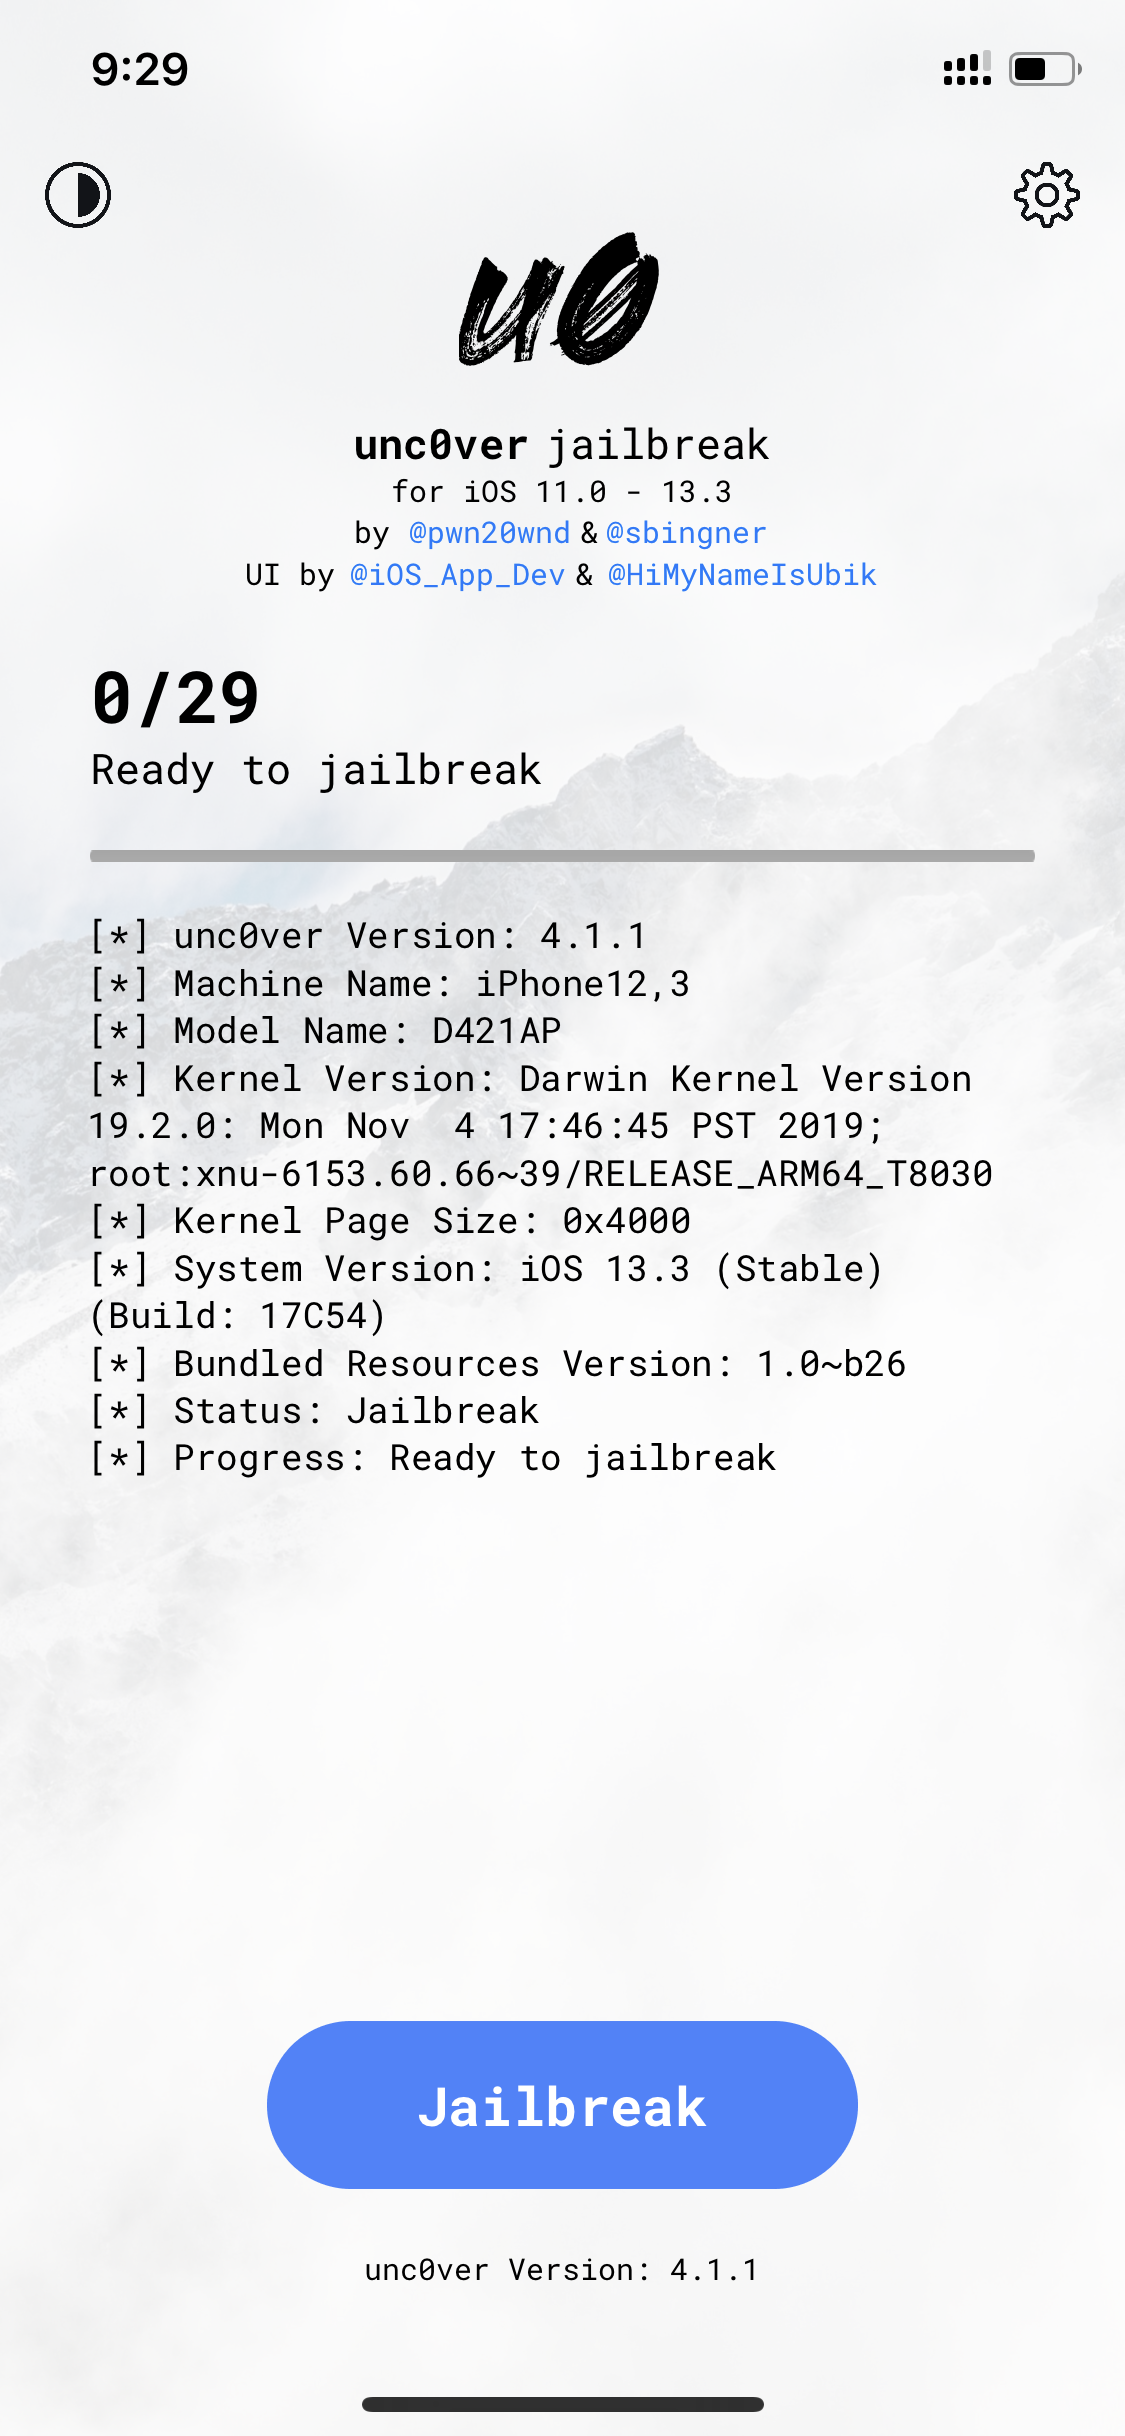 Now it's time to proceed on iOS 13 jailbreak 